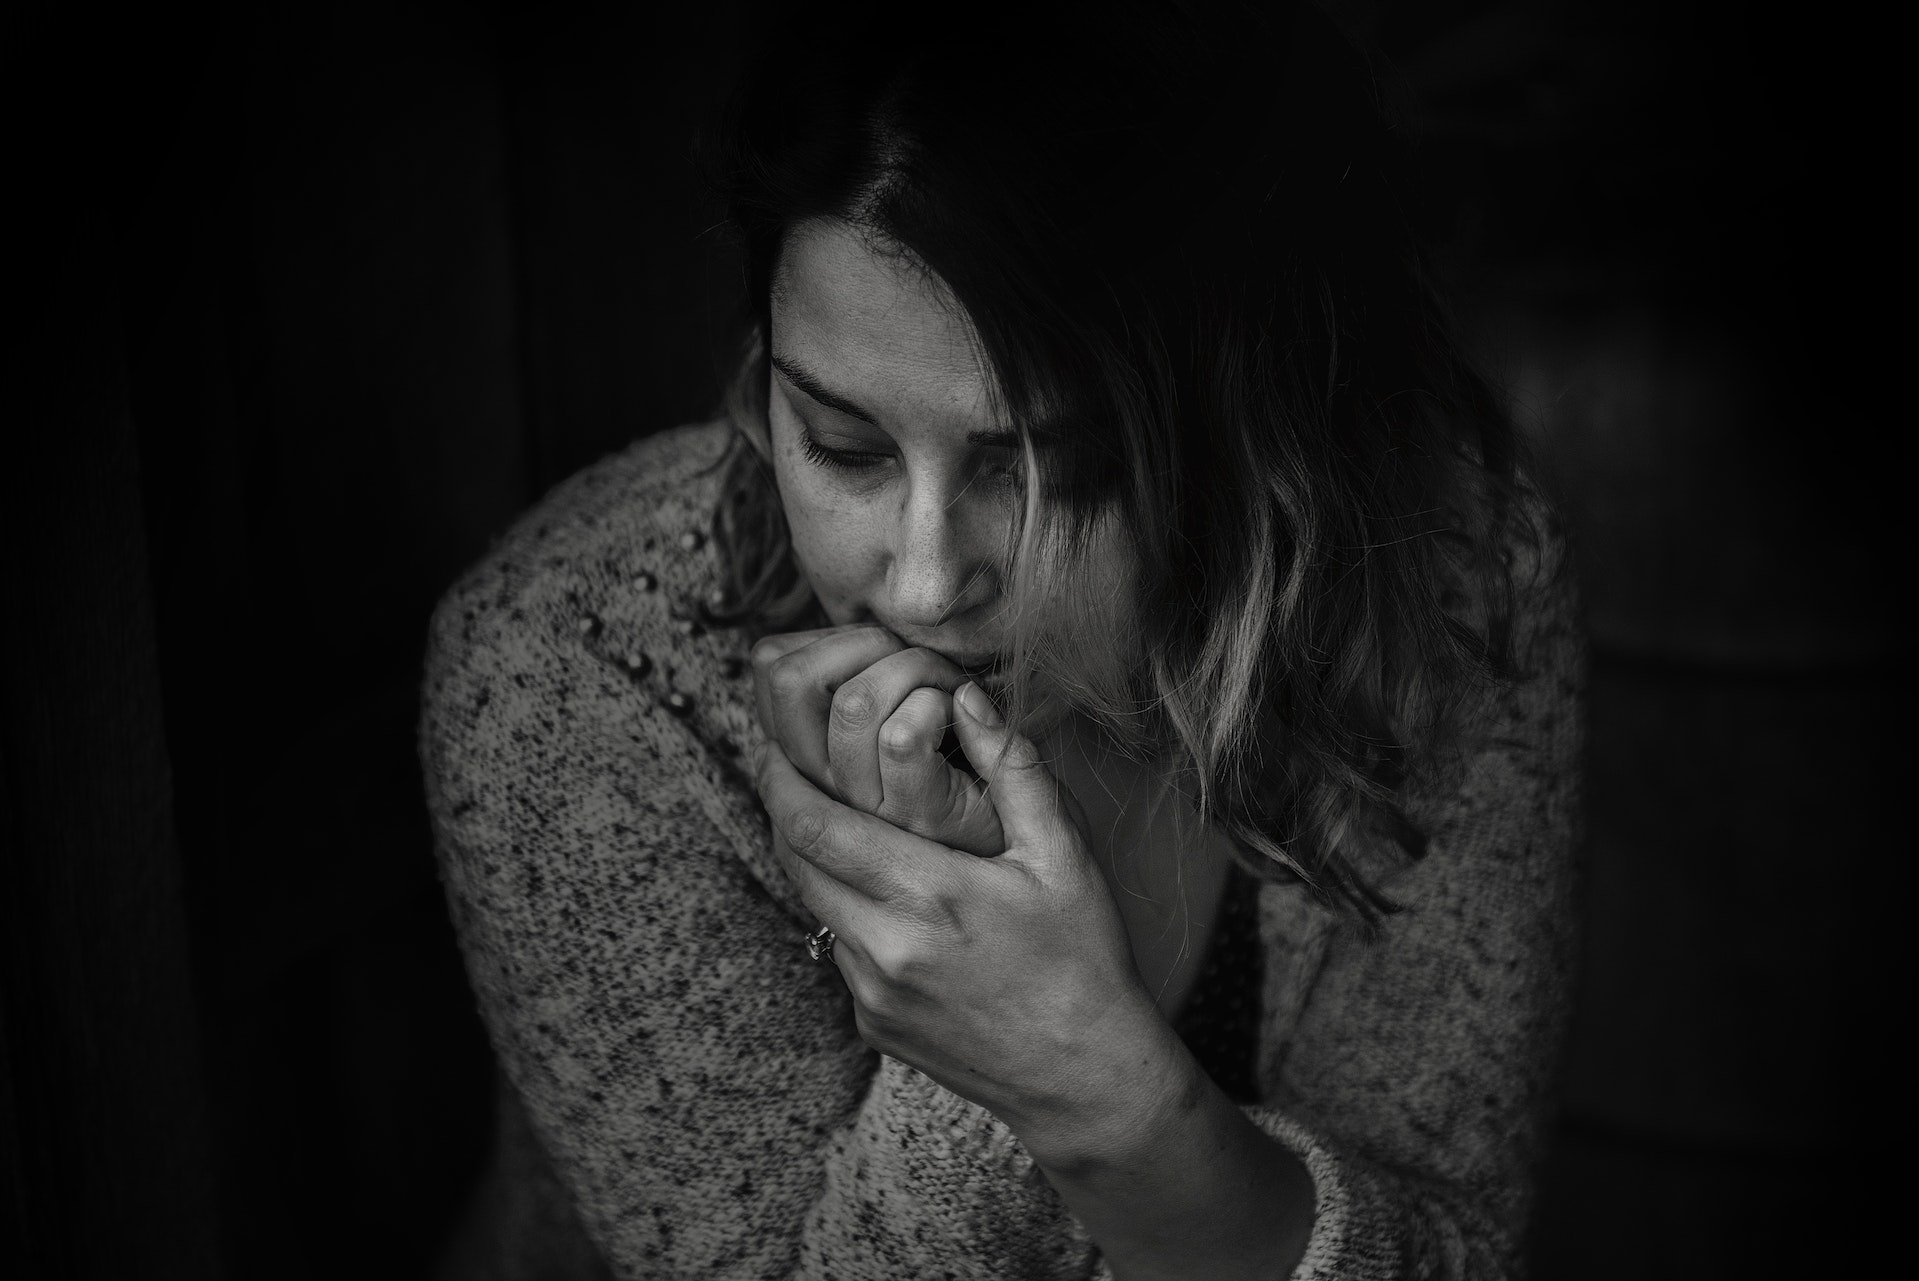 Image of a Woman Biting Her Nails